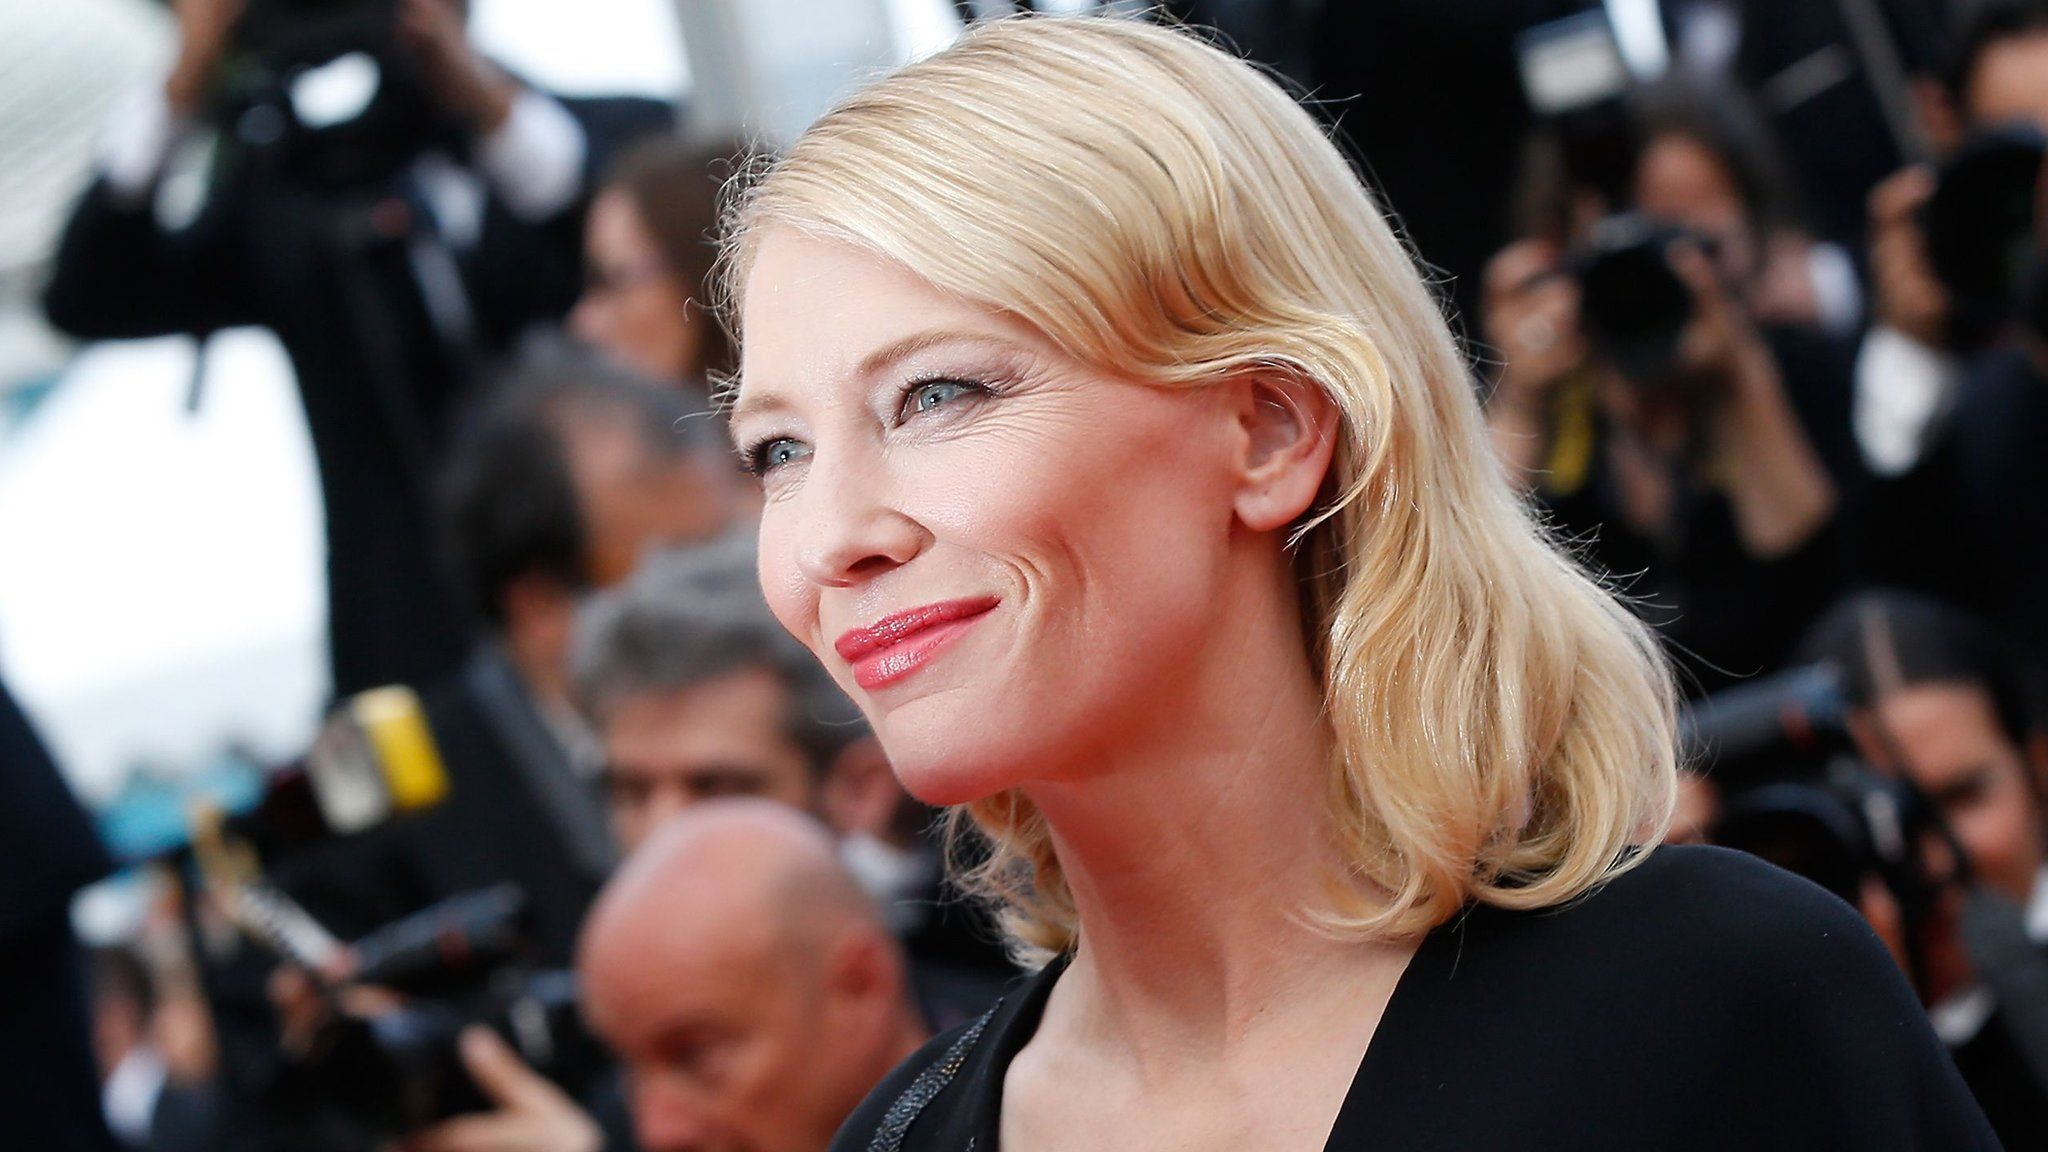 Cate Blanchett film Carol tipped for Cannes glory - BBC News